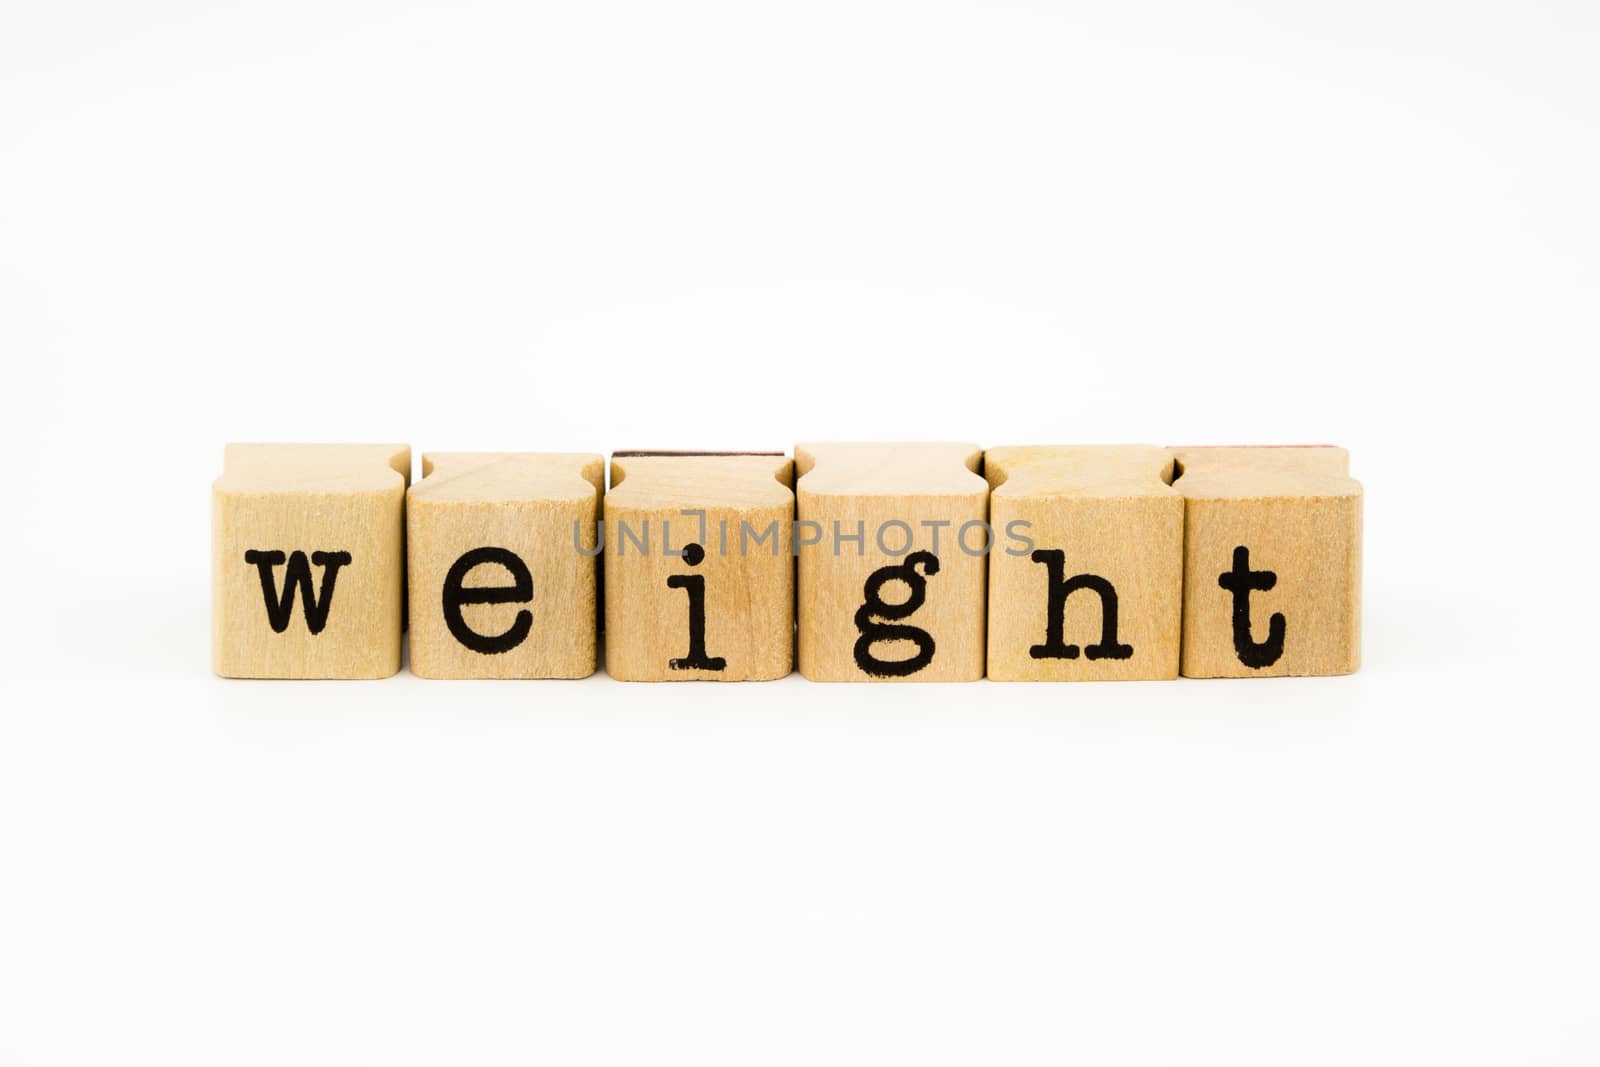 weight wording isolate on white background by vinnstock